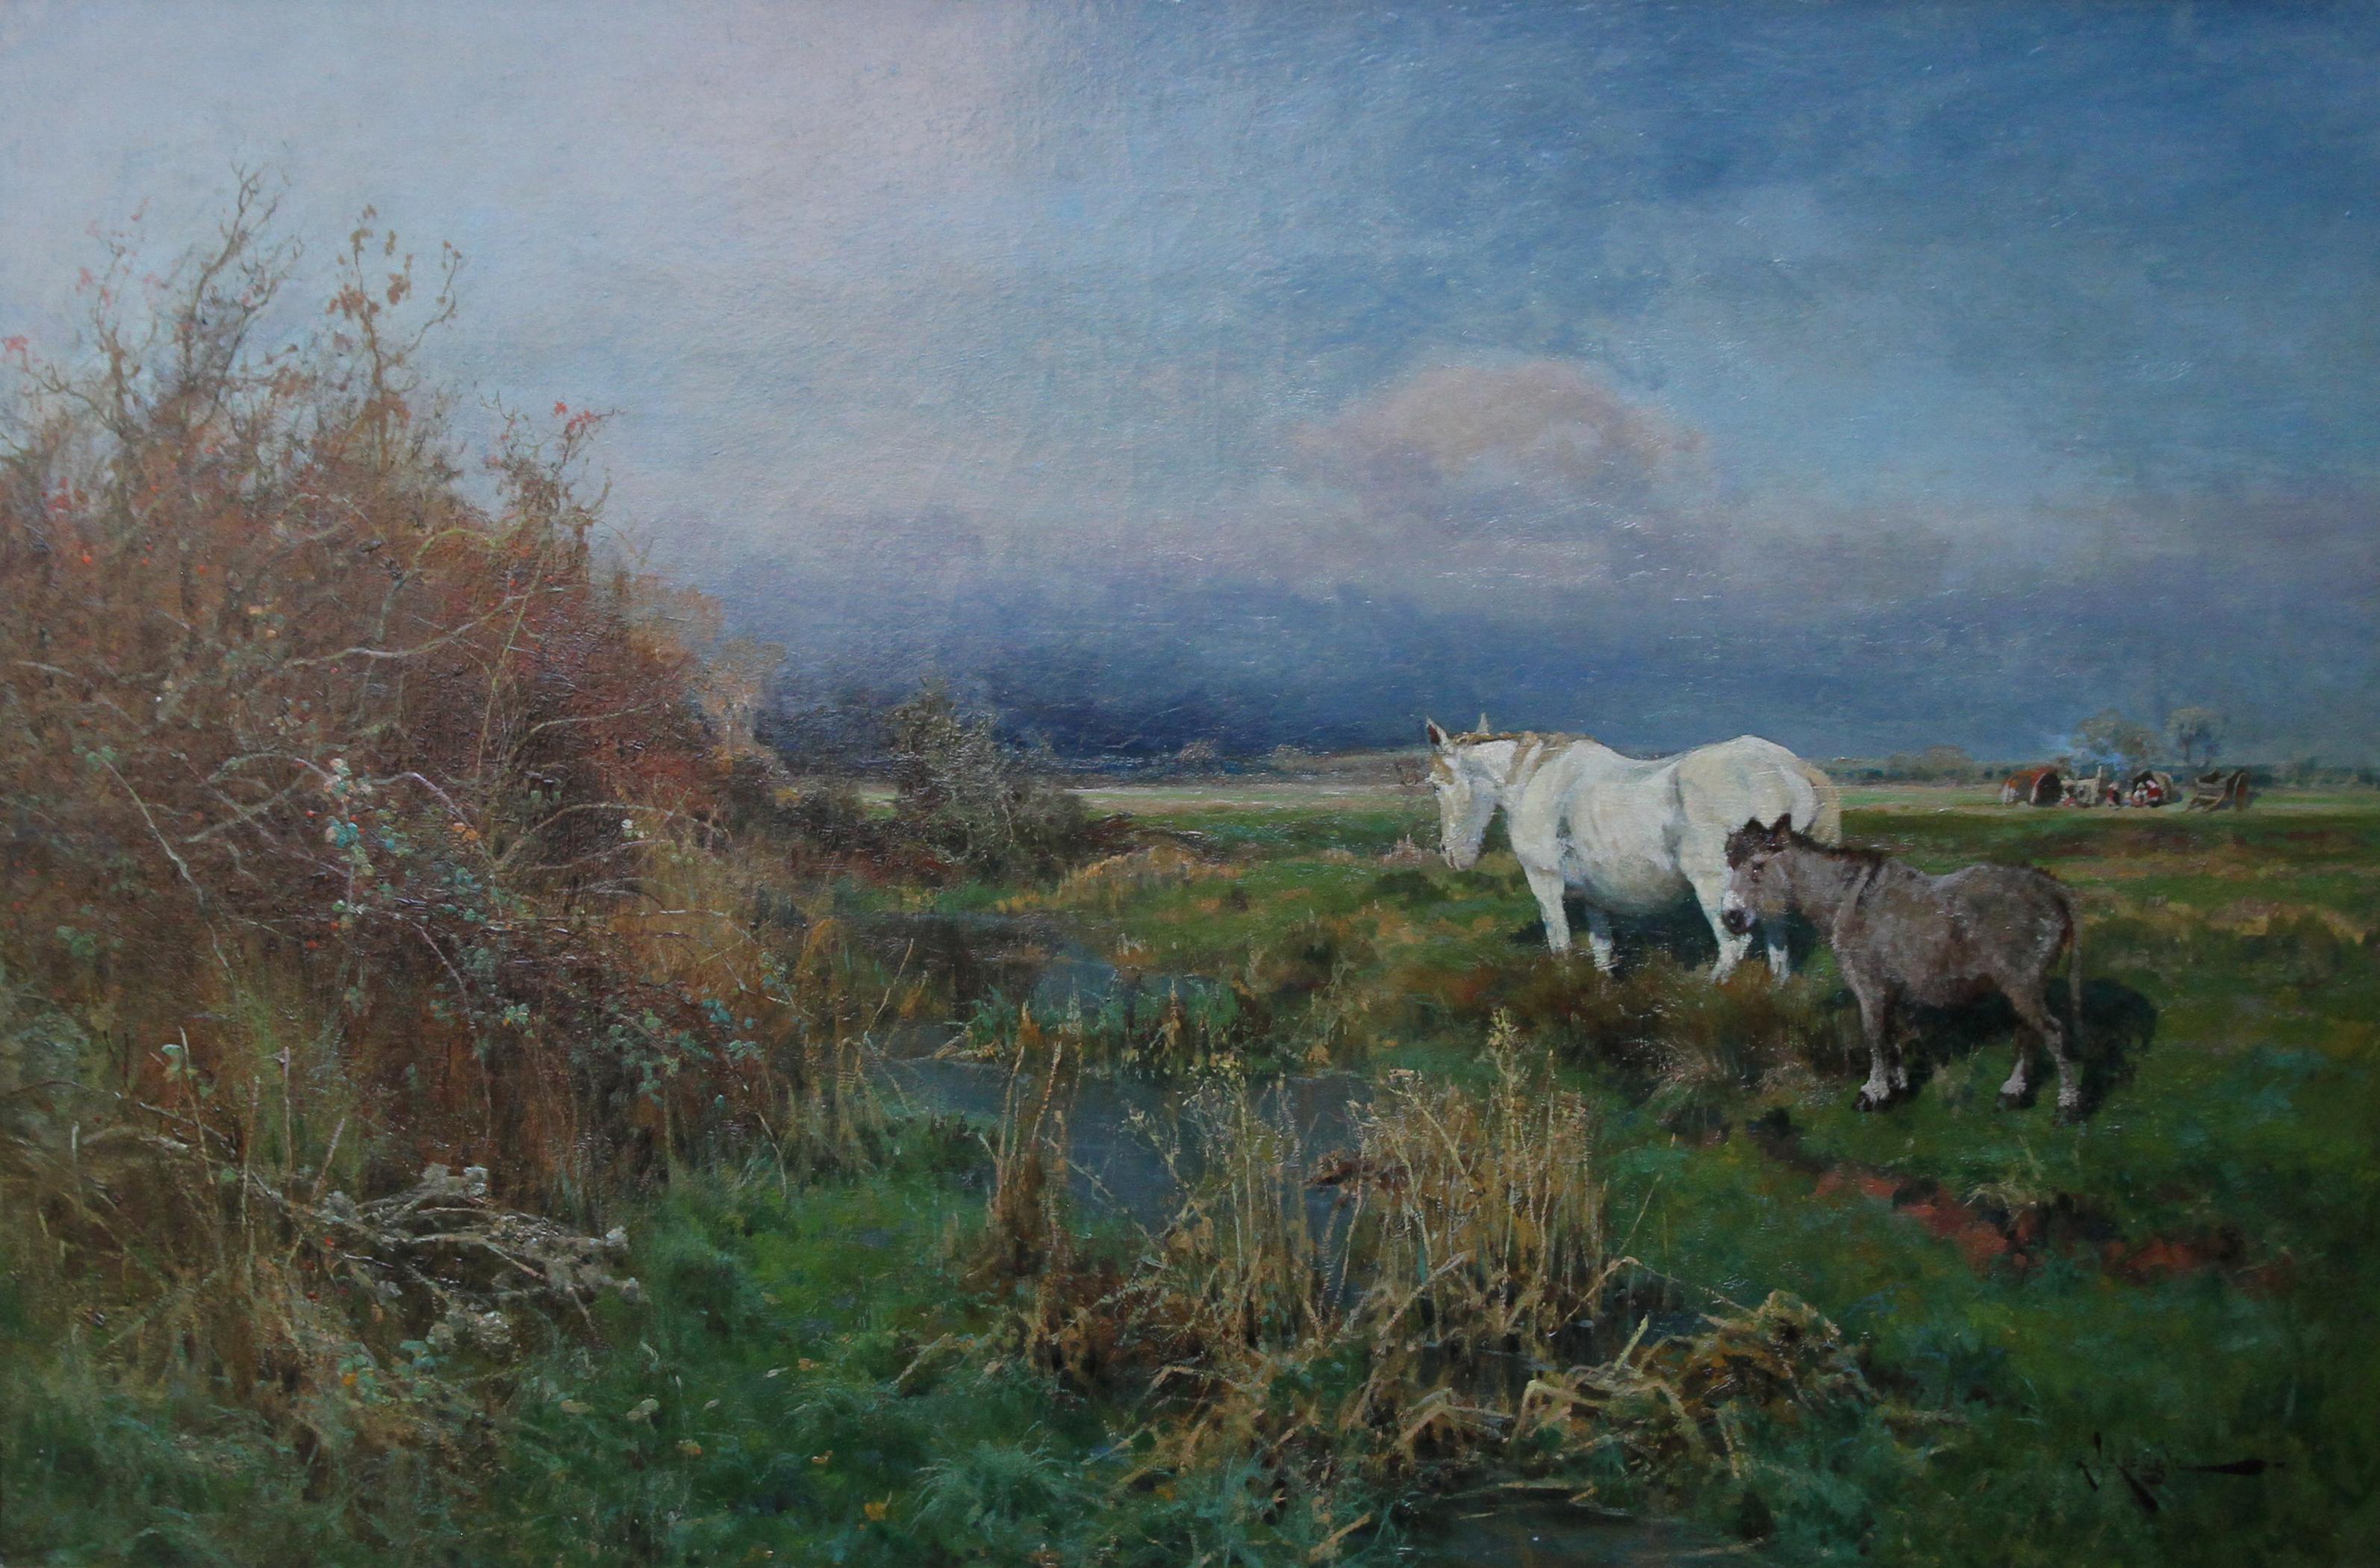 Nottingham Landscape with horse - British 1900 animal oil painting equine art - Painting by Arthur William Redgate